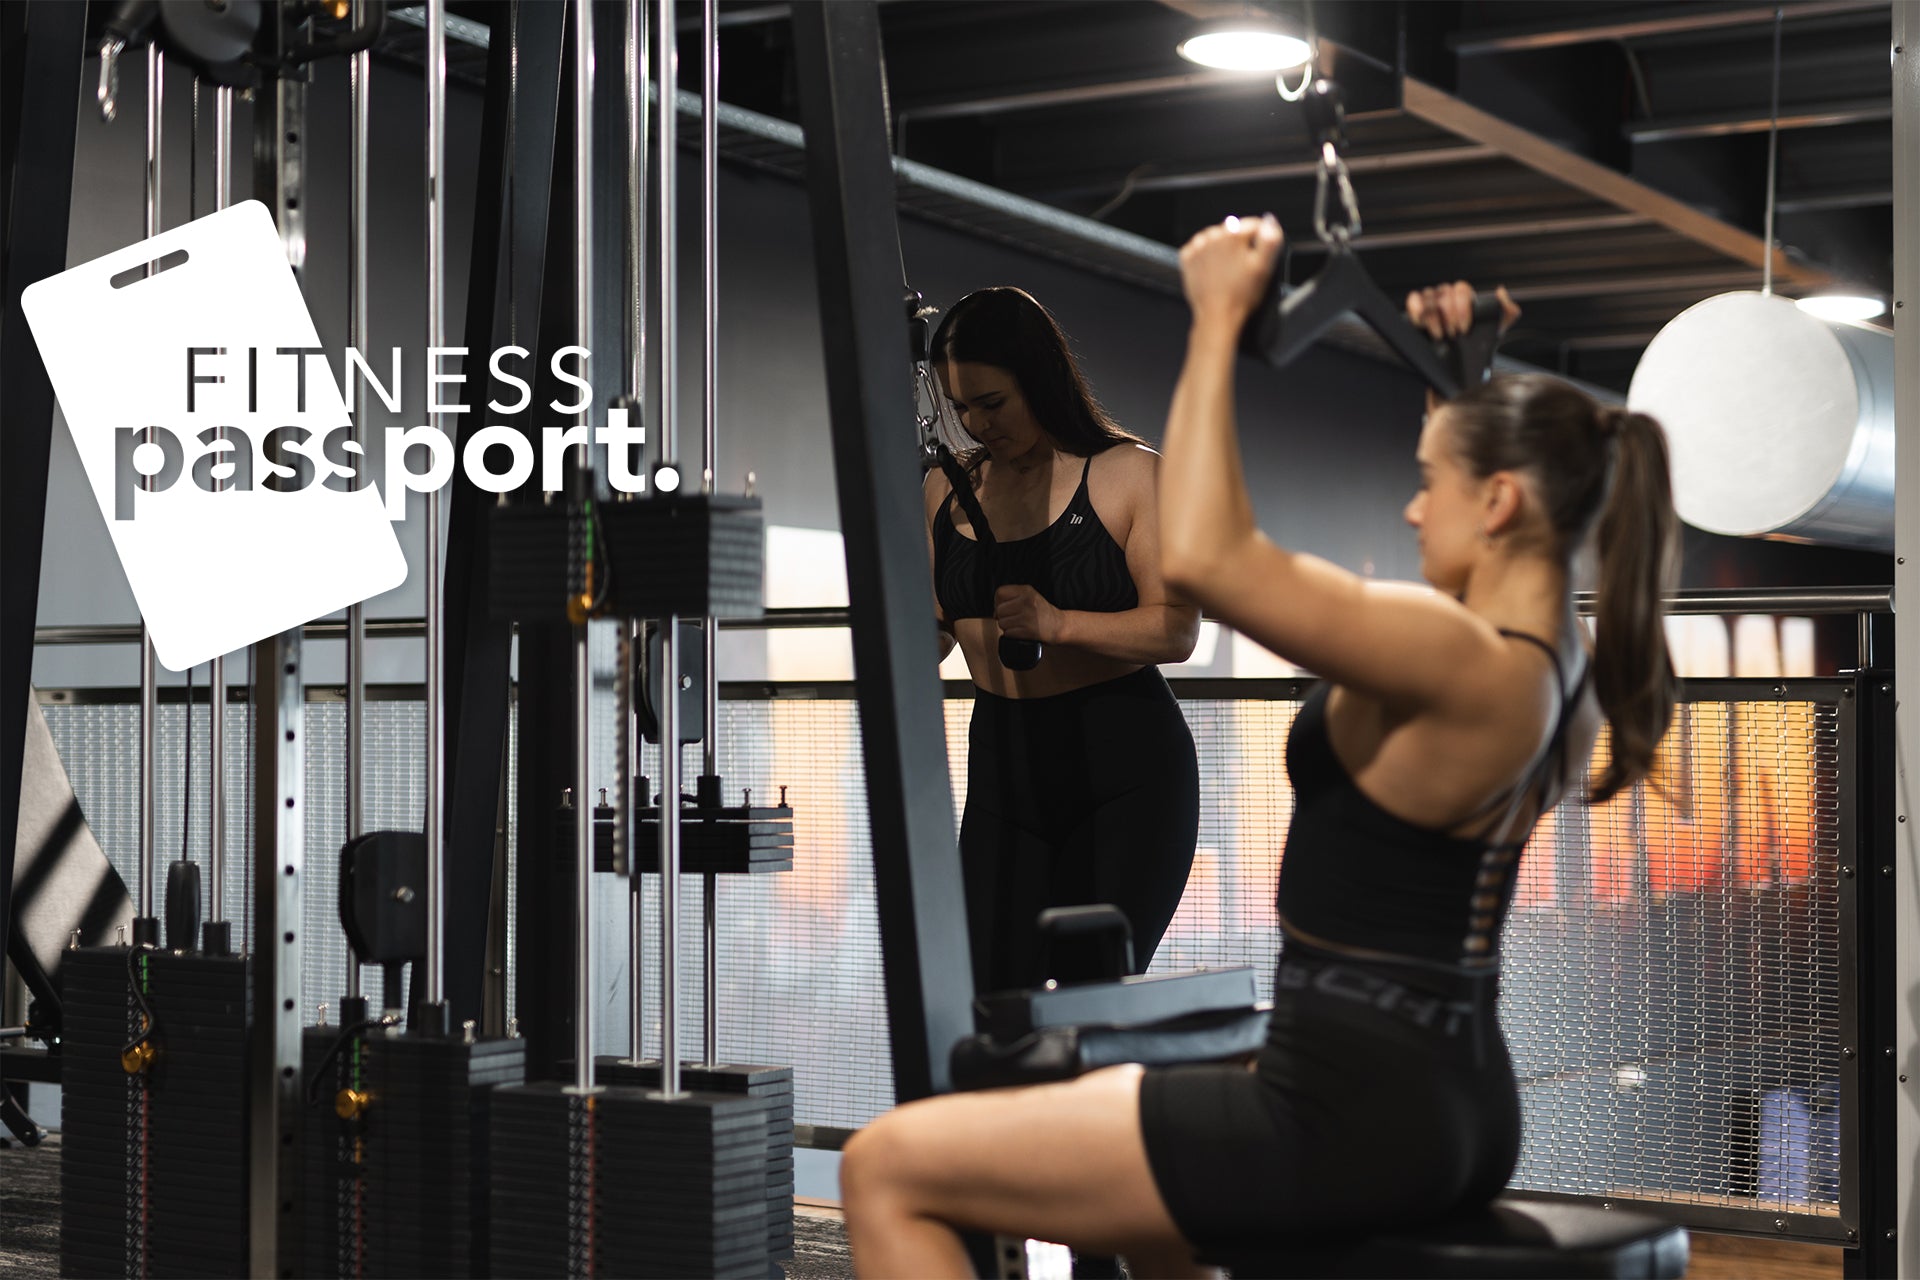 Inception Gym welcomes Fitness Passport members